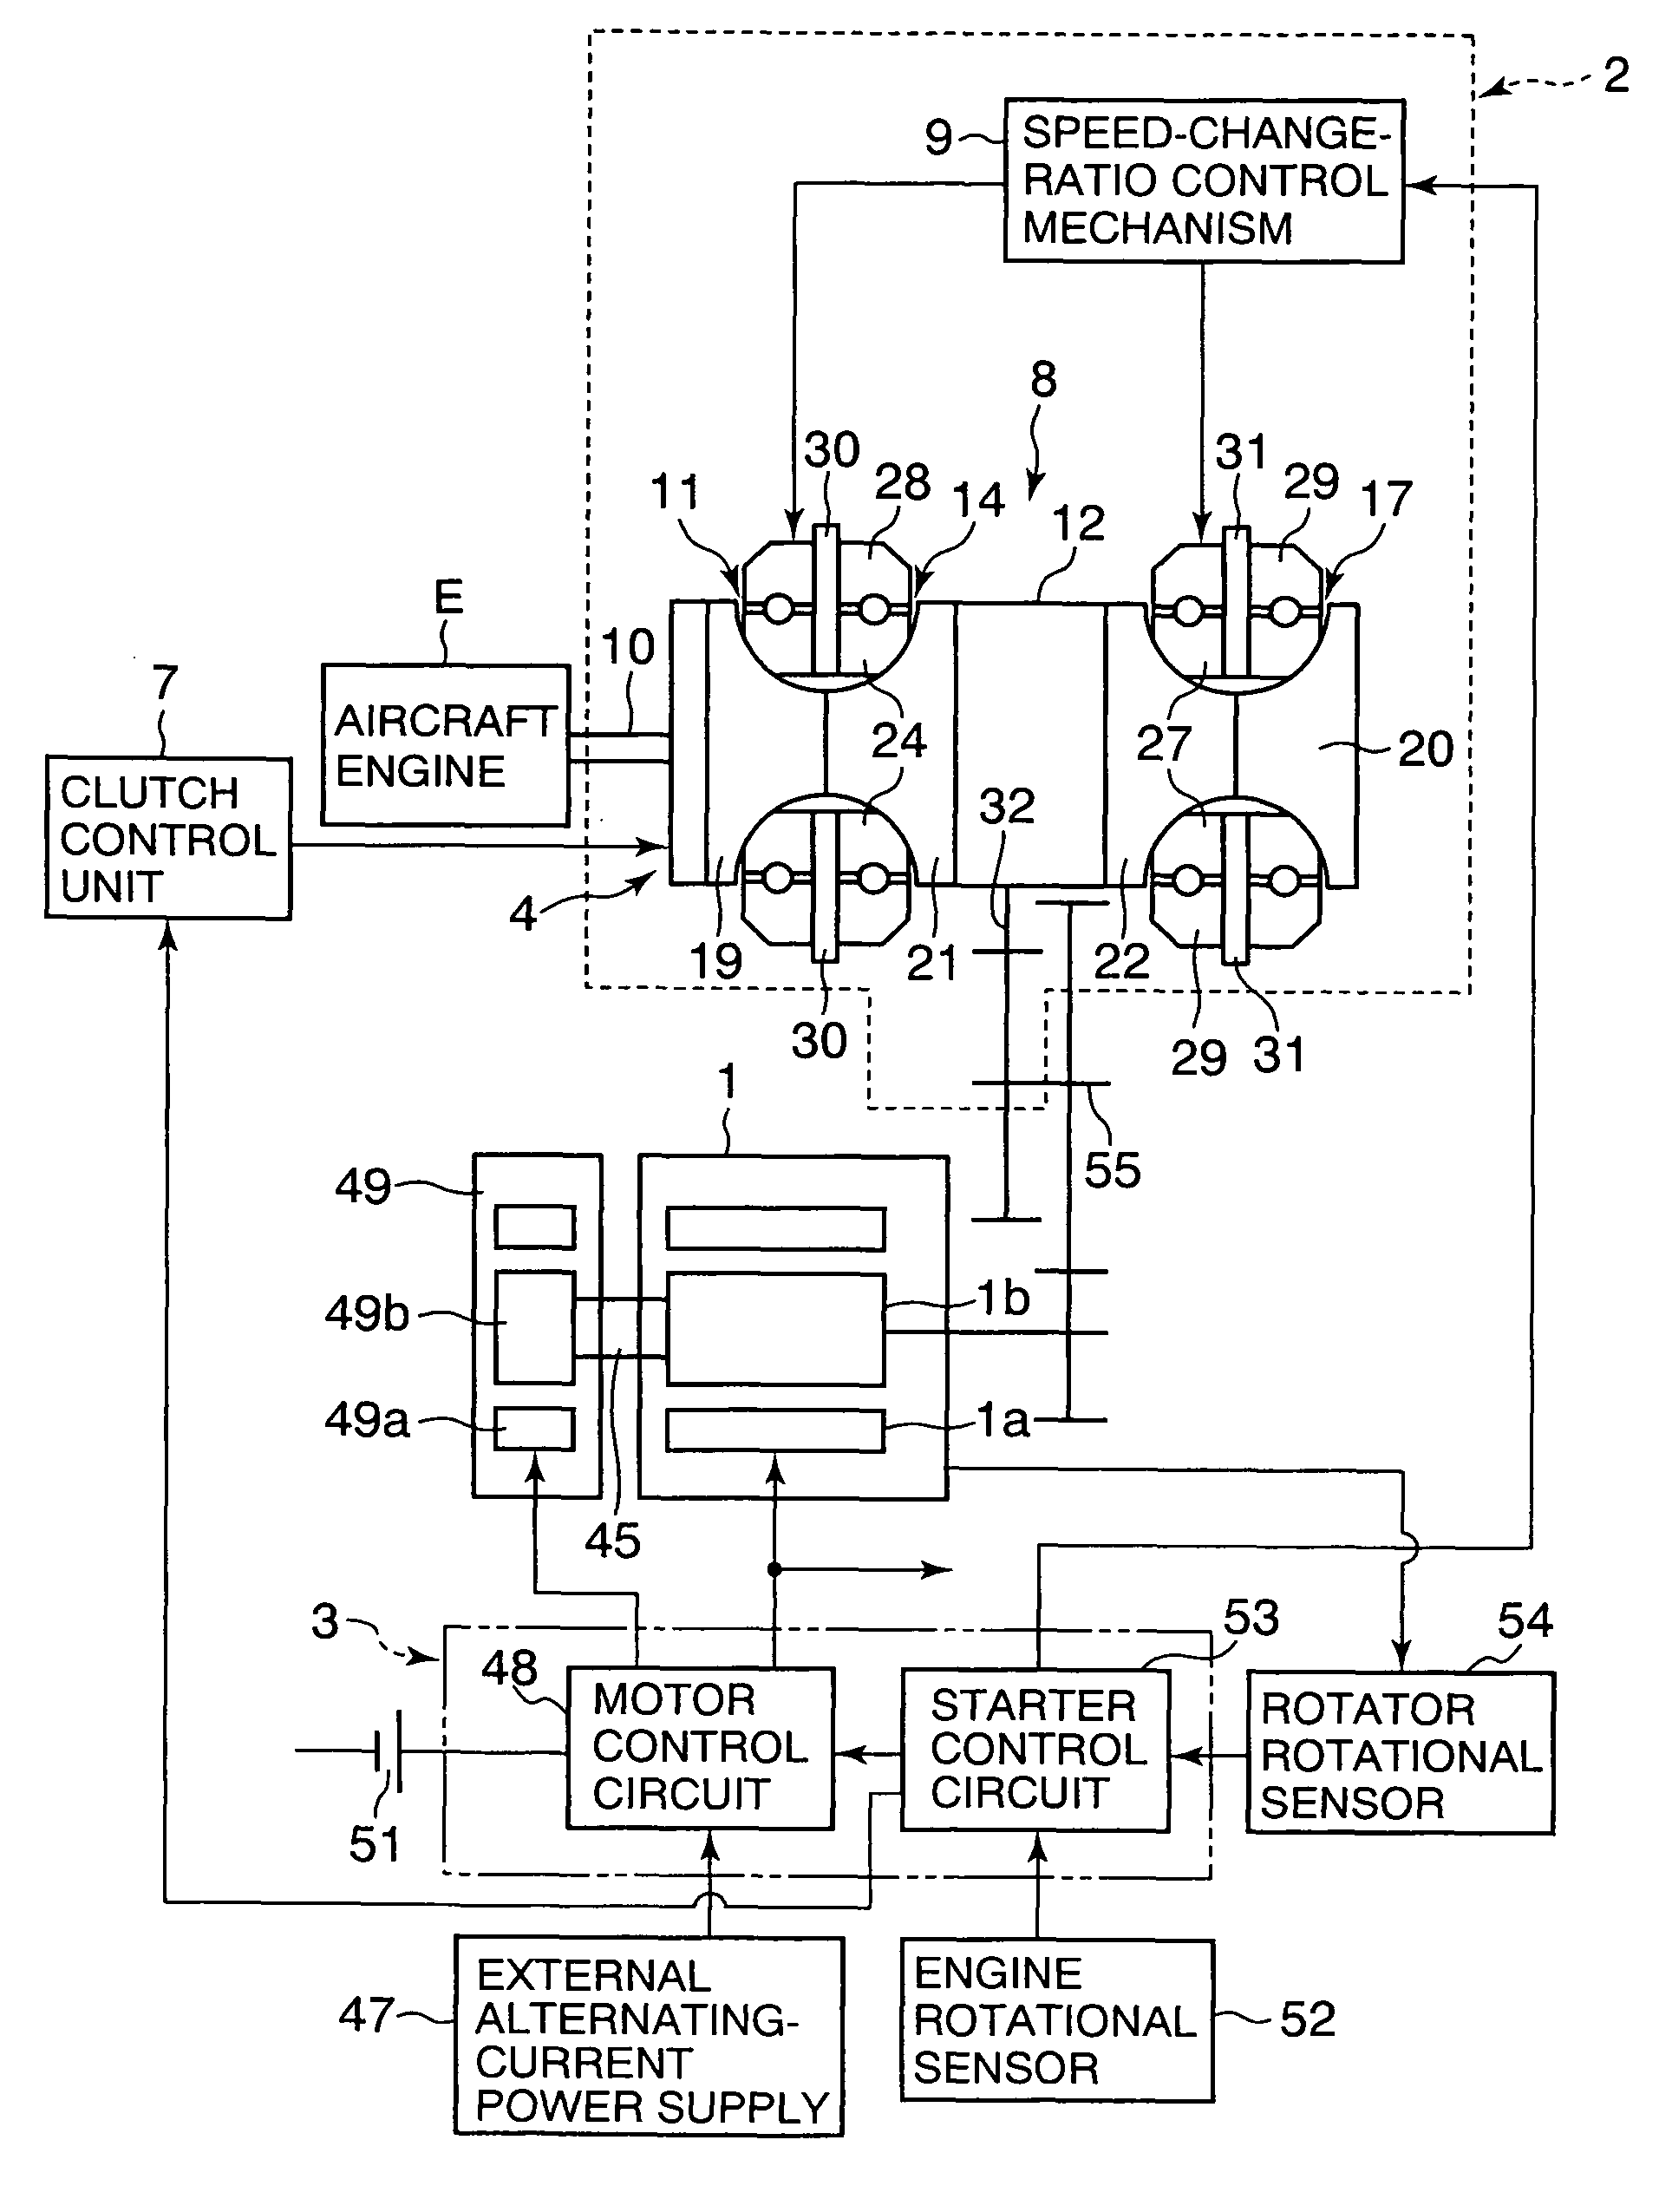 Starting and generating apparatus for engine